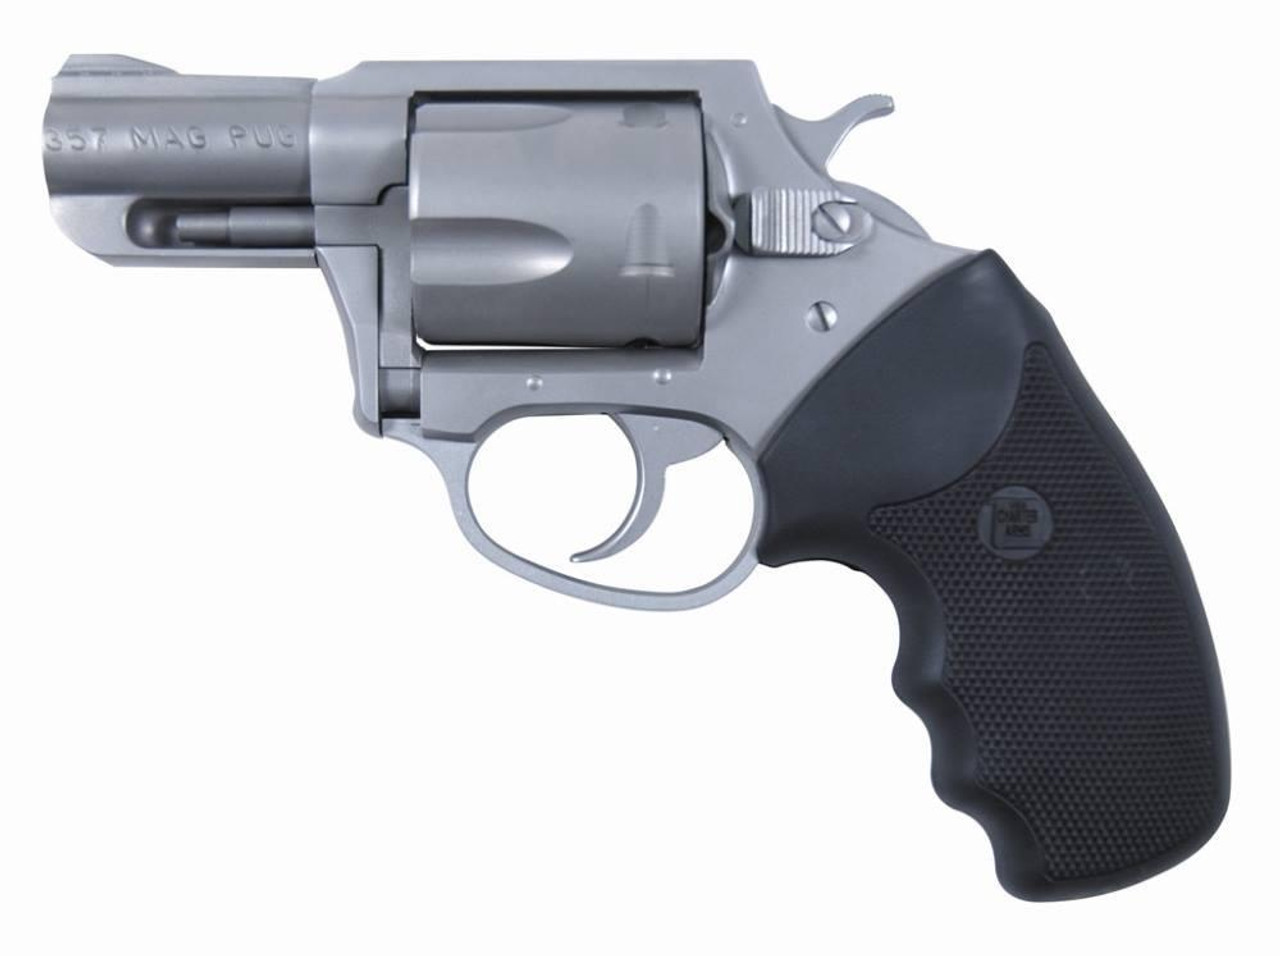 CHARTER ARMS MAG PUG 357 MAGNUM | 38 SPECIAL #73520